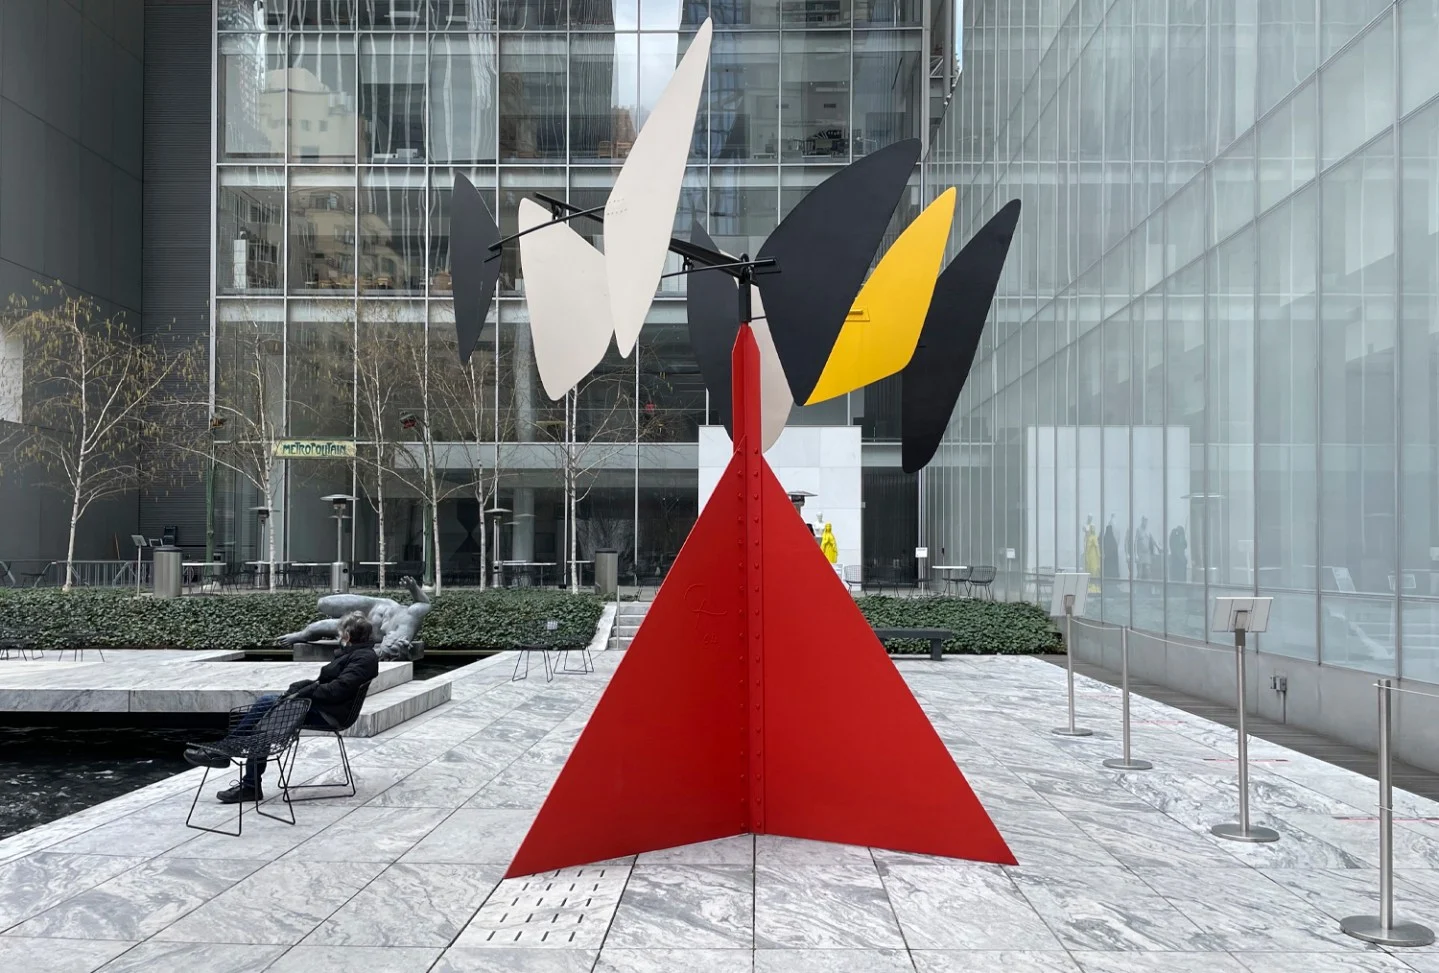 Alexander Calder's sculpture at the venue of MoMA's Party in the Garden